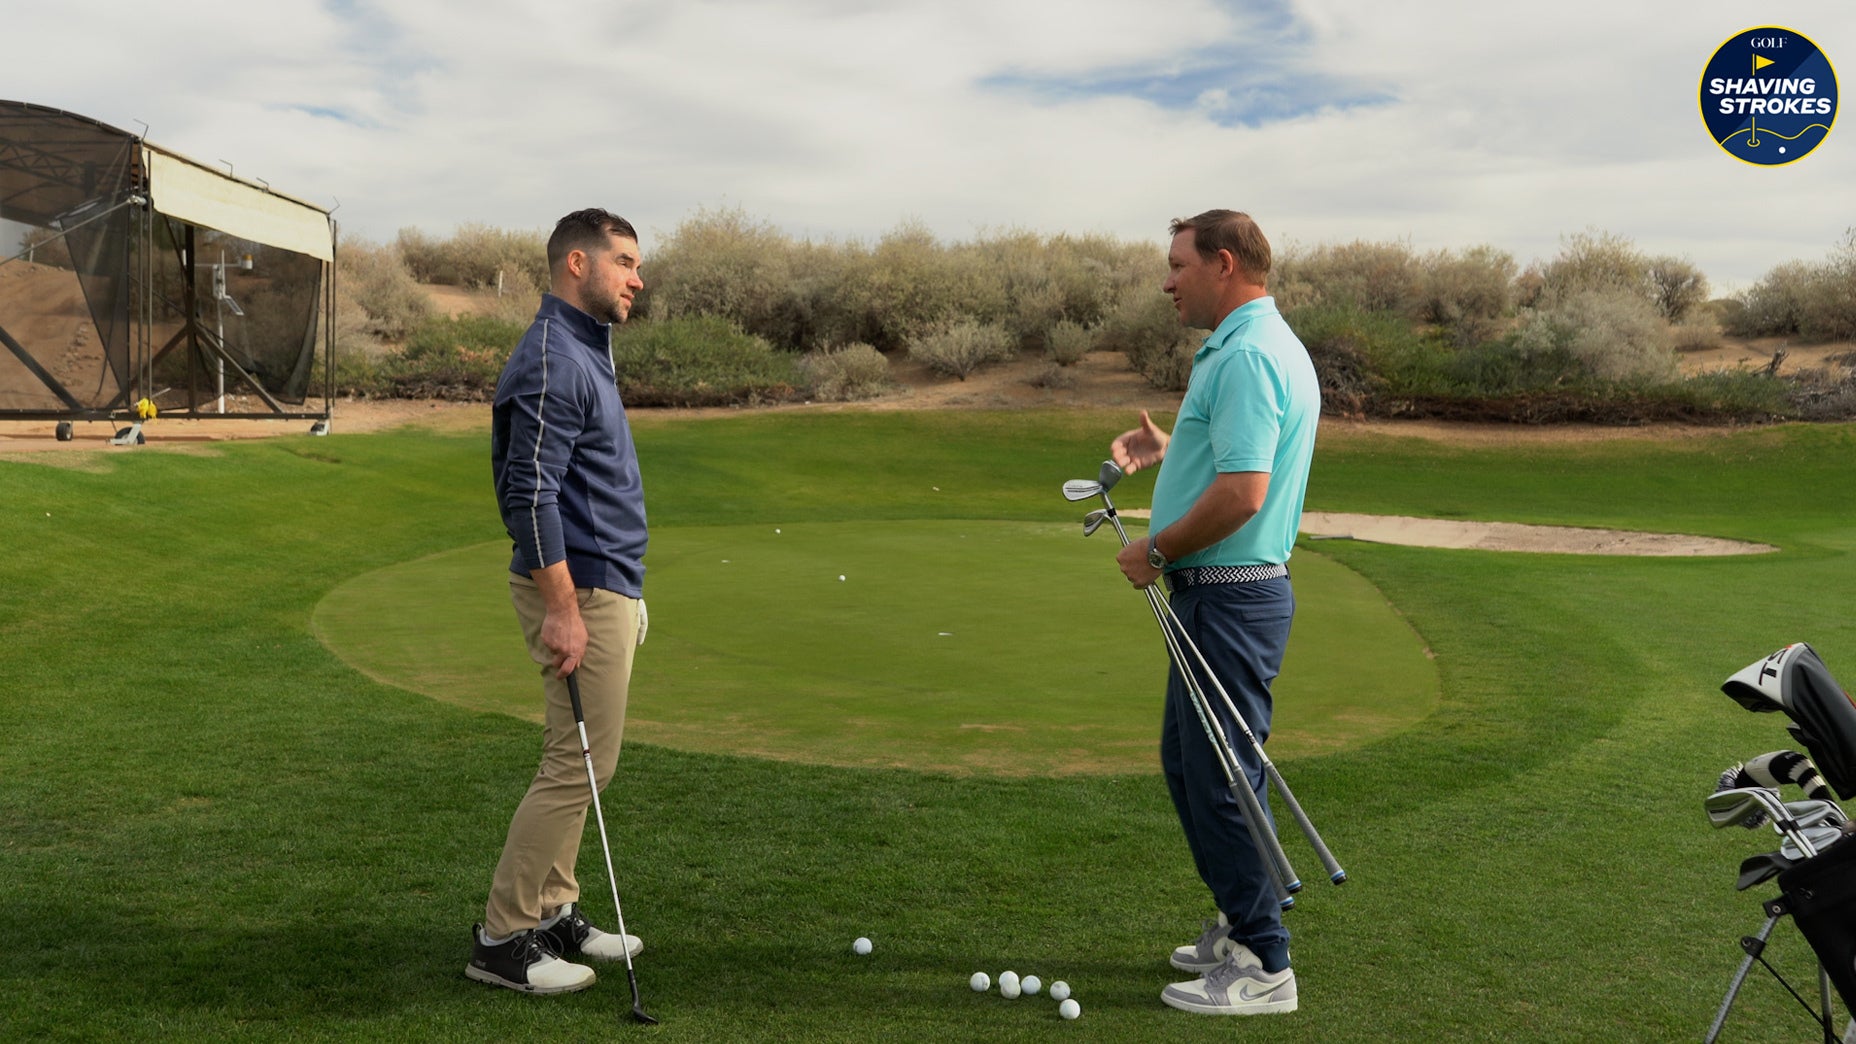 GOLF Top 100 Teacher Mike Dickson shares some tips on how to use different clubs to execute a bump and run around the greens